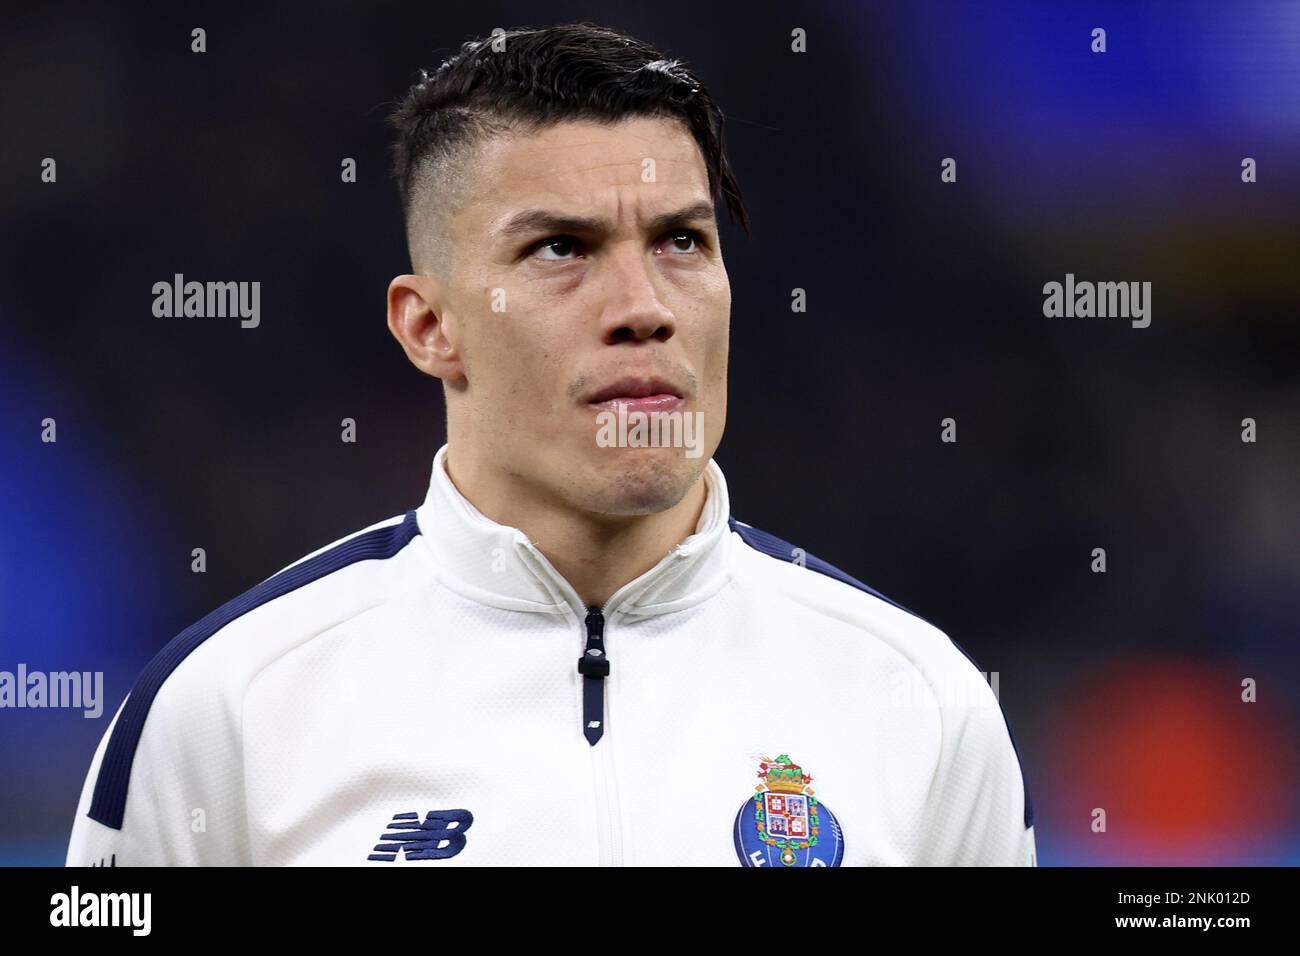 Milano Italy . February 22, 2023, Mateus Uribe of Fc Porto looks on during the Uefa Champions League round of 16 first leg match between Fc Internazionale and Fc Porto at Stadio Giuseppe Meazza on February 22, 2023 in Milano Italy . Stock Photo